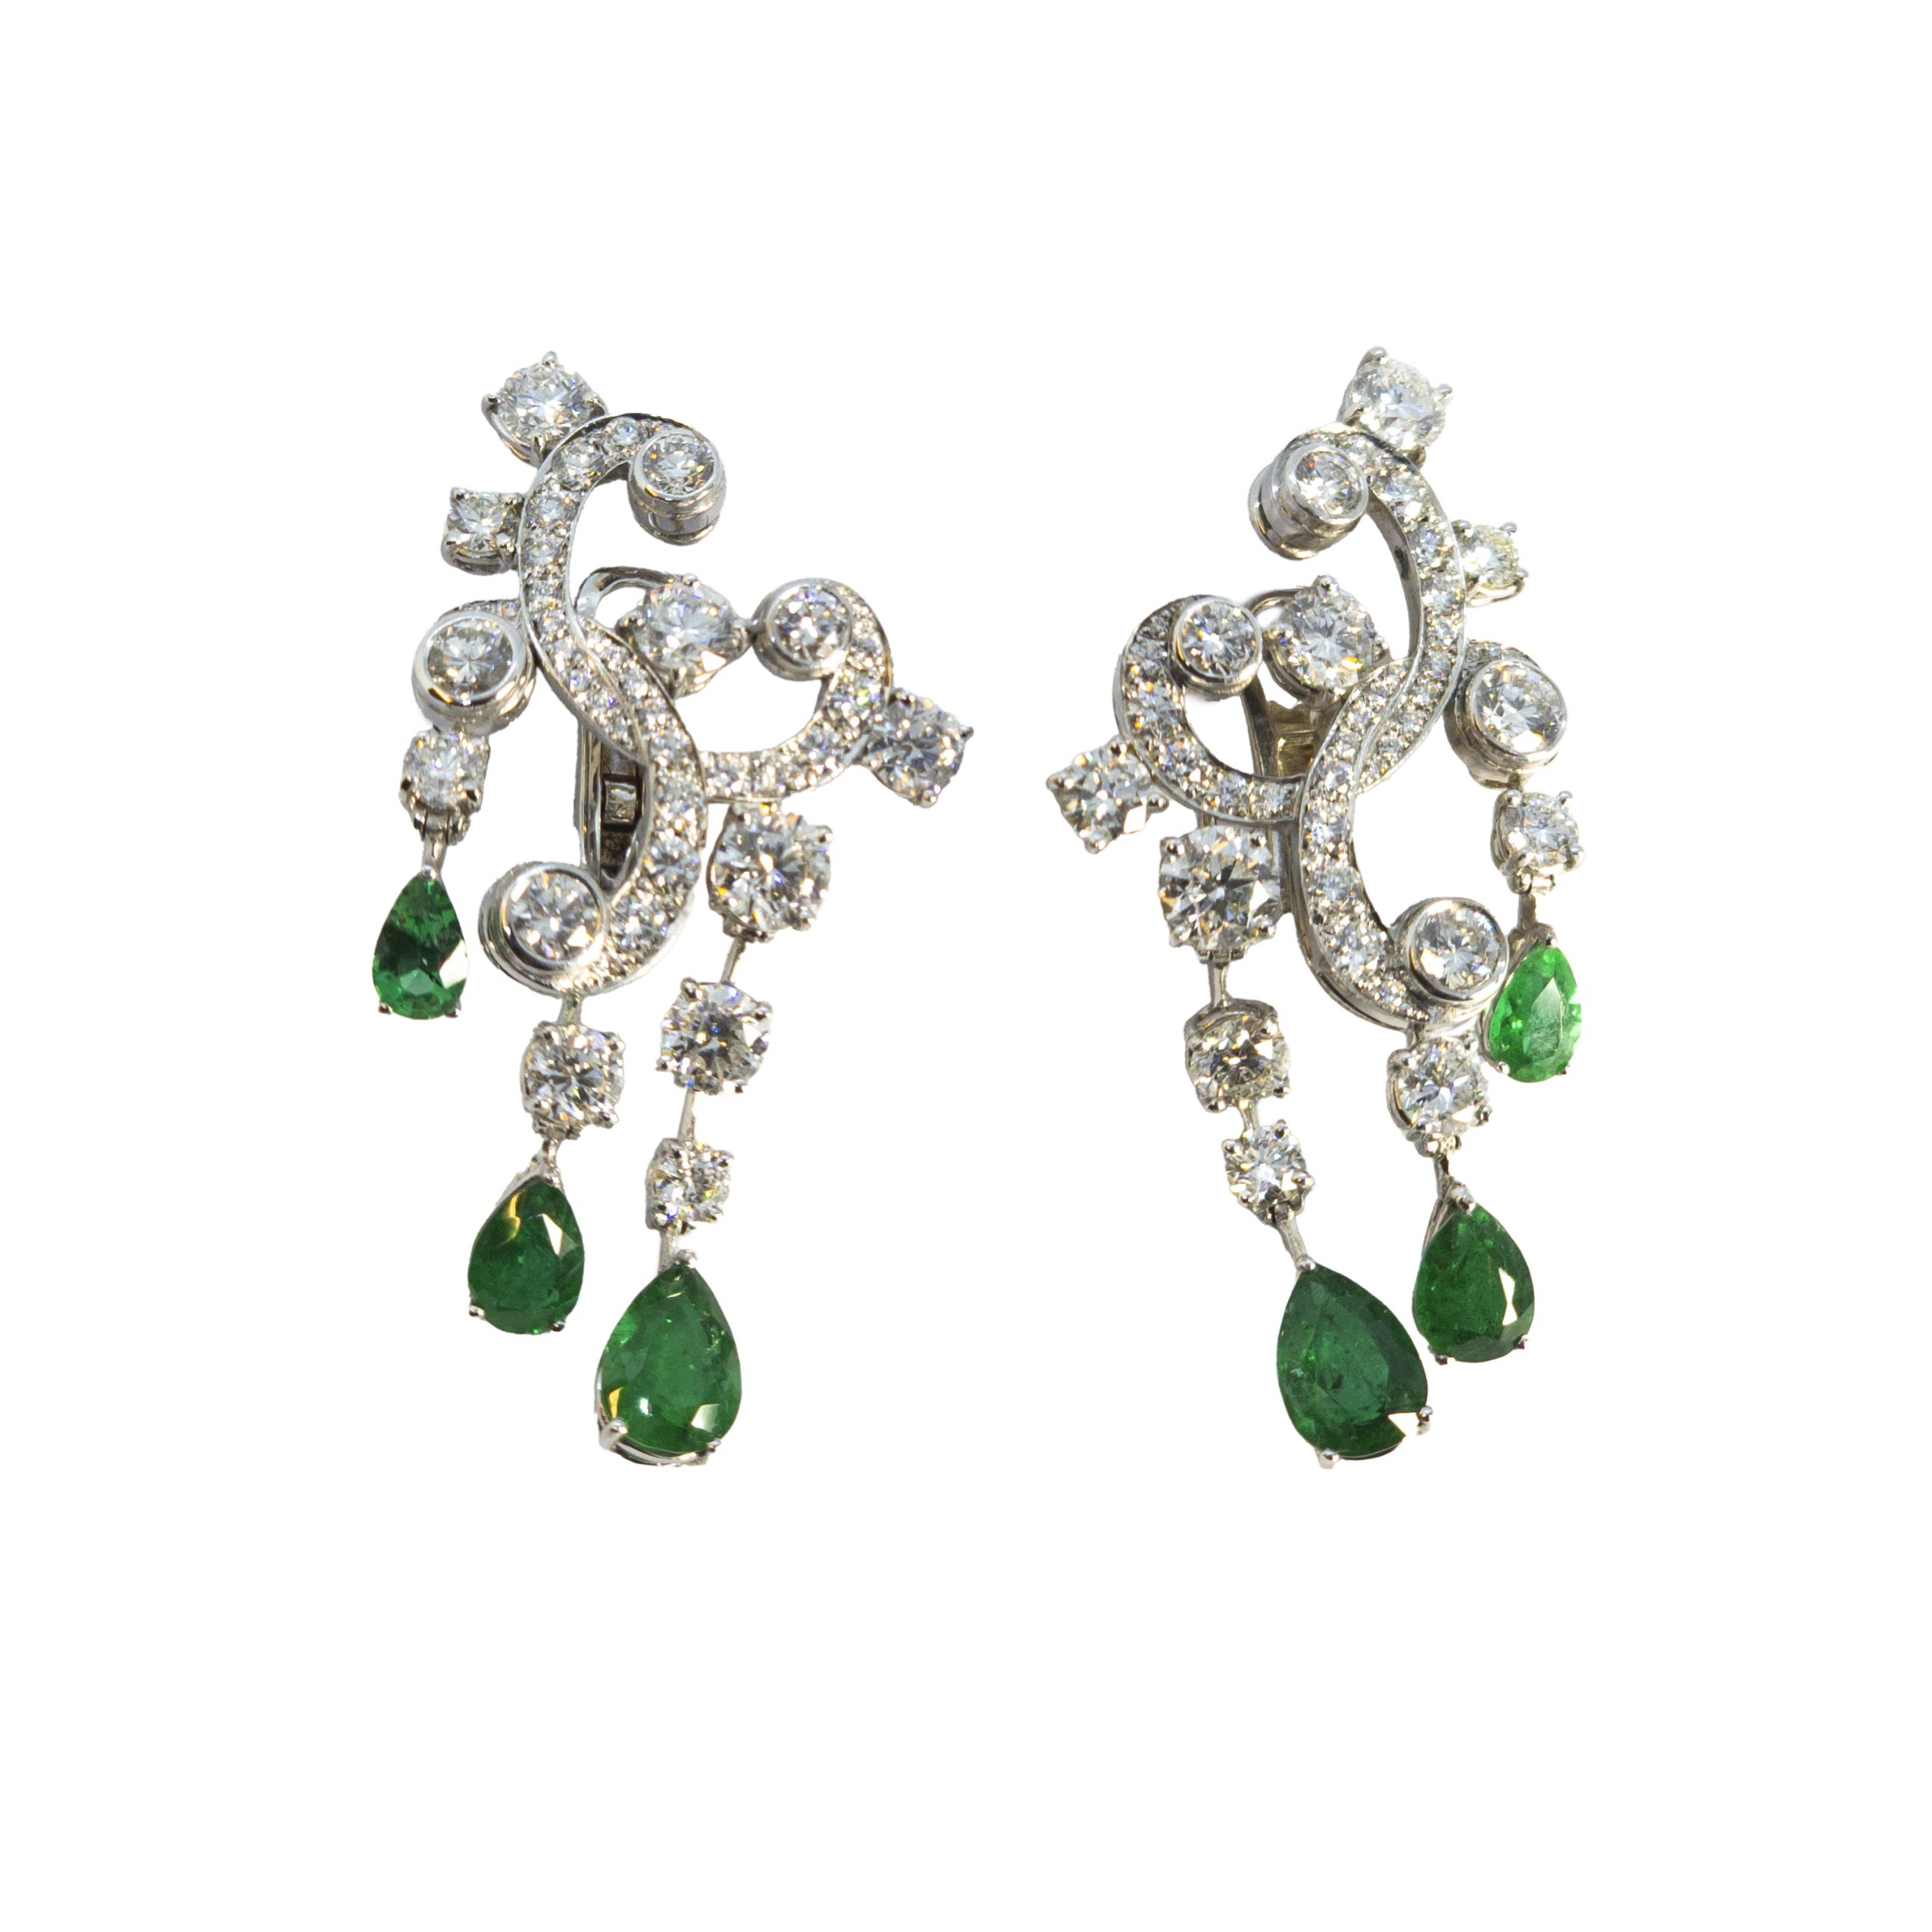 European, Circa 1980, A fine and attractive pair of diamond and emerald earrings